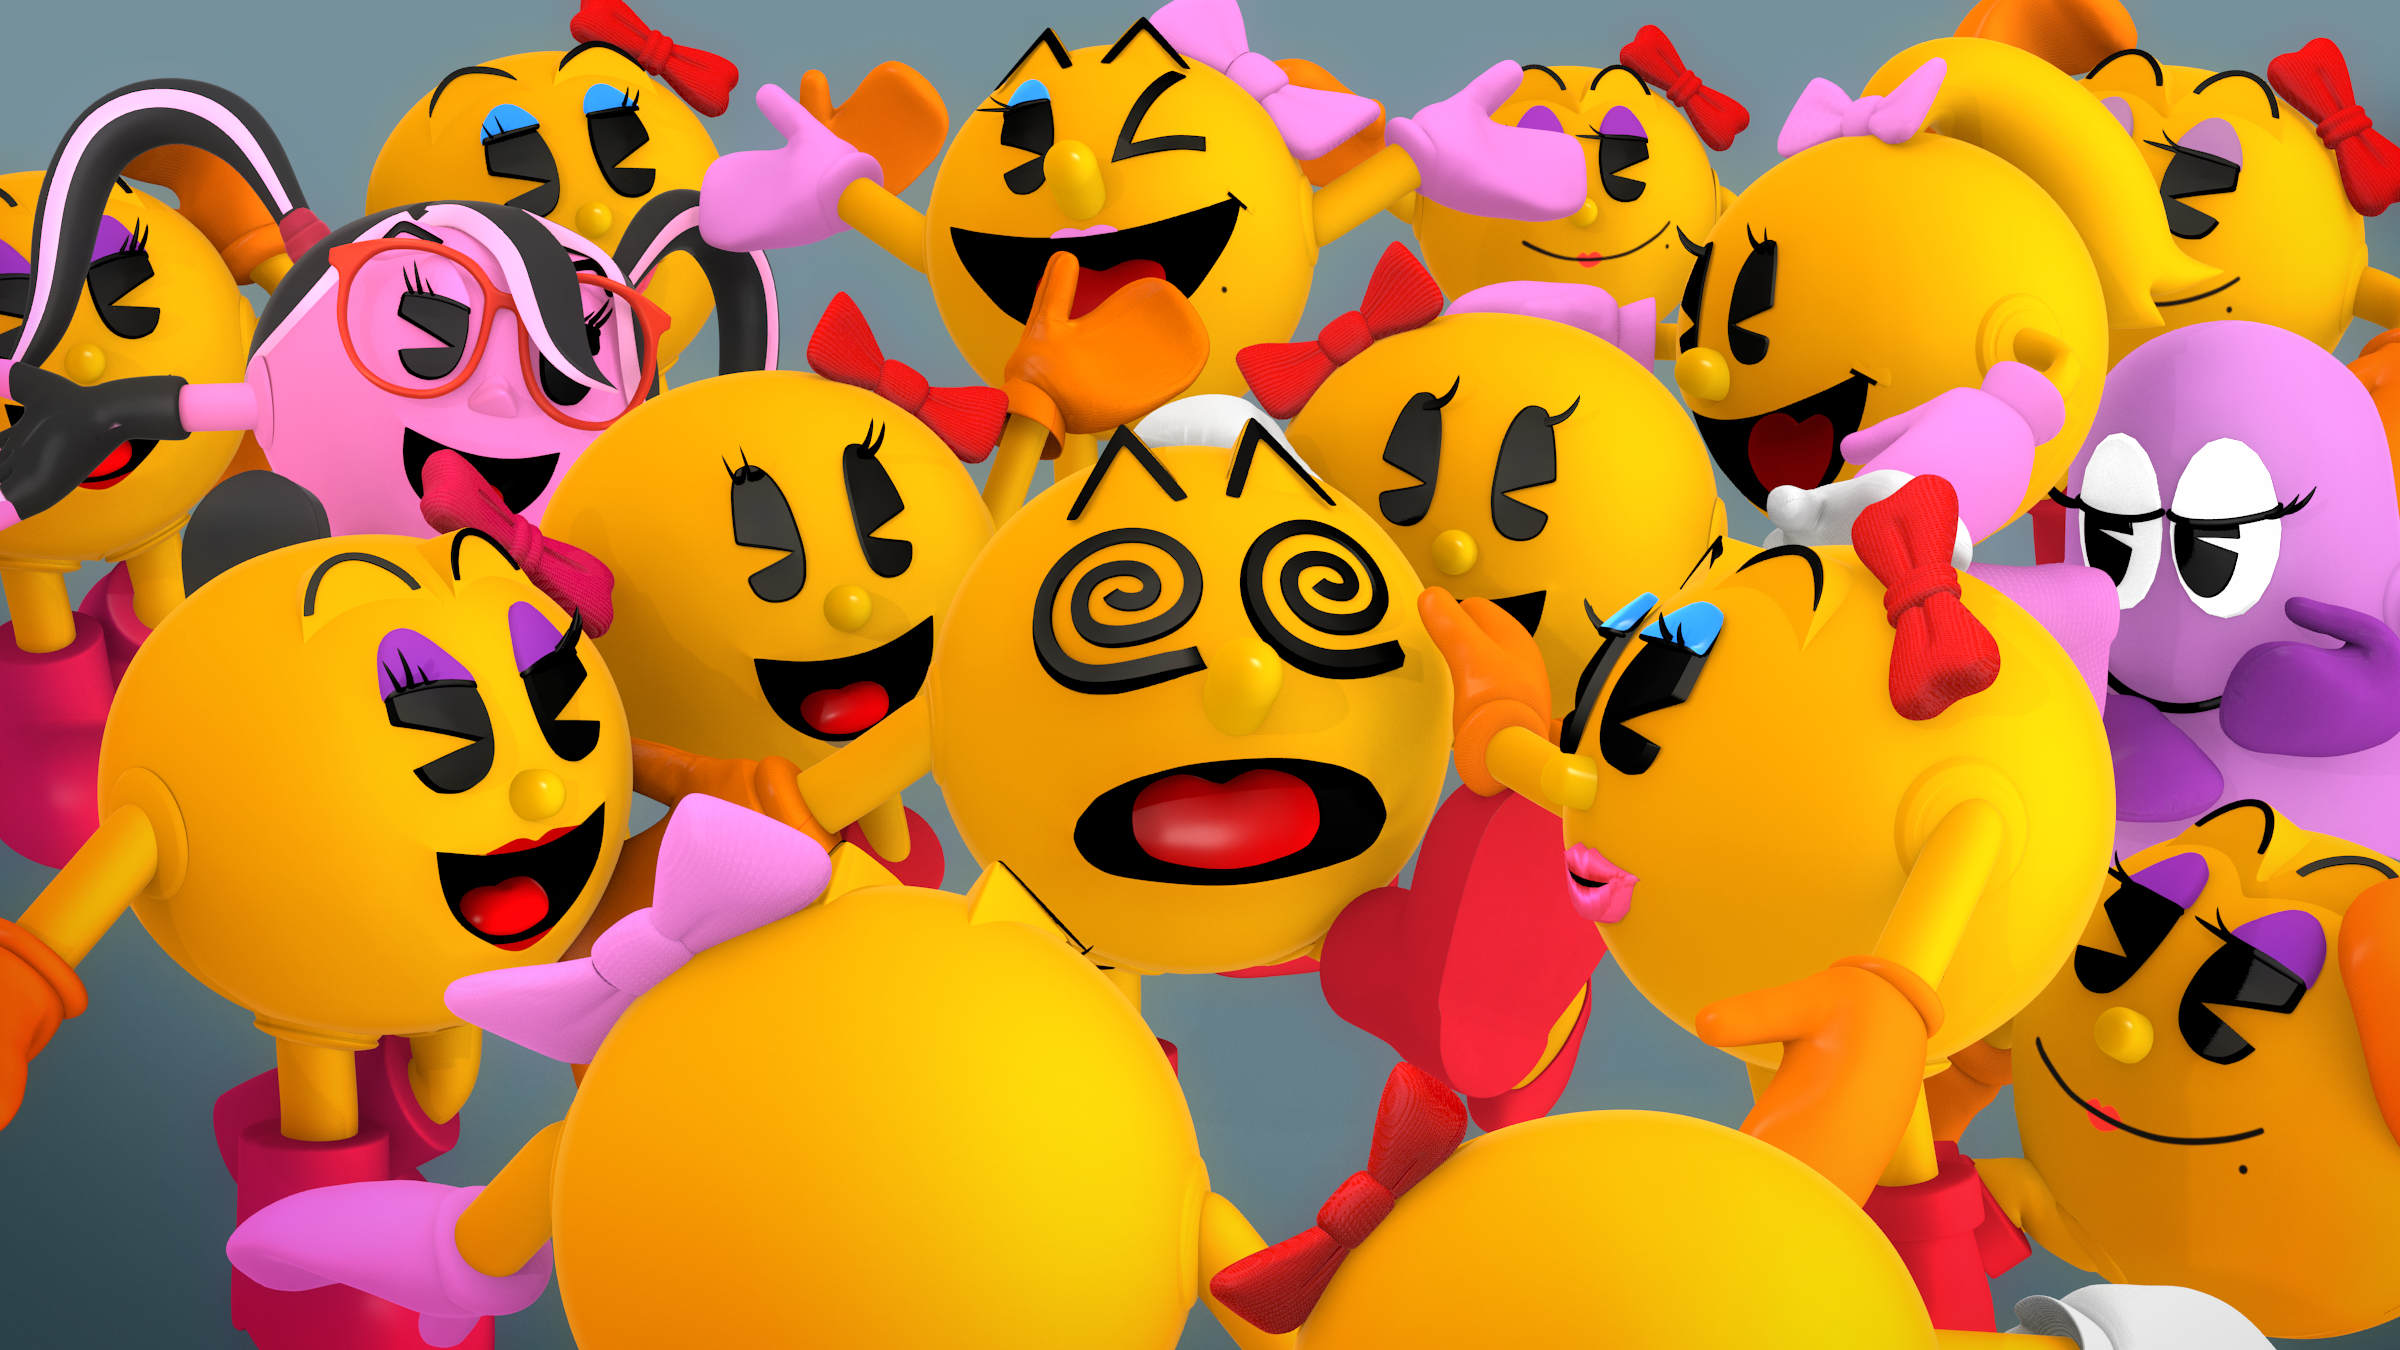 MS PAC MAN 99 by Nibroc-Rock on DeviantArt